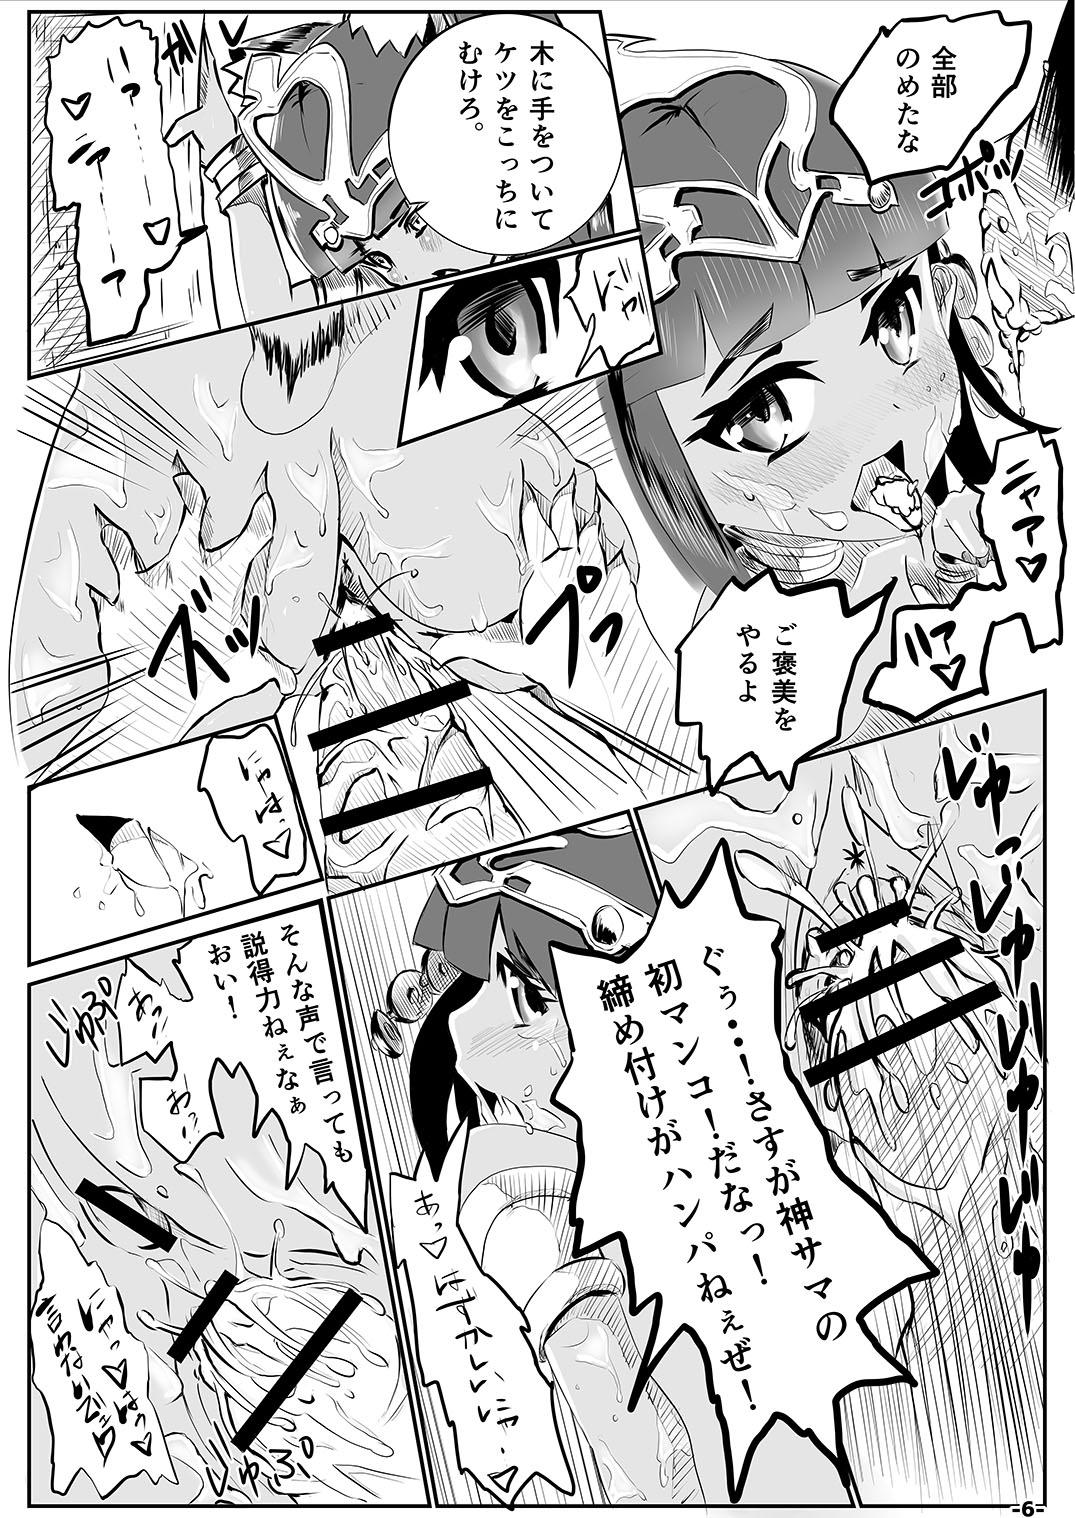 Piercing Yamiochi 2nd - Puzzle and dragons Pussy Licking - Page 5